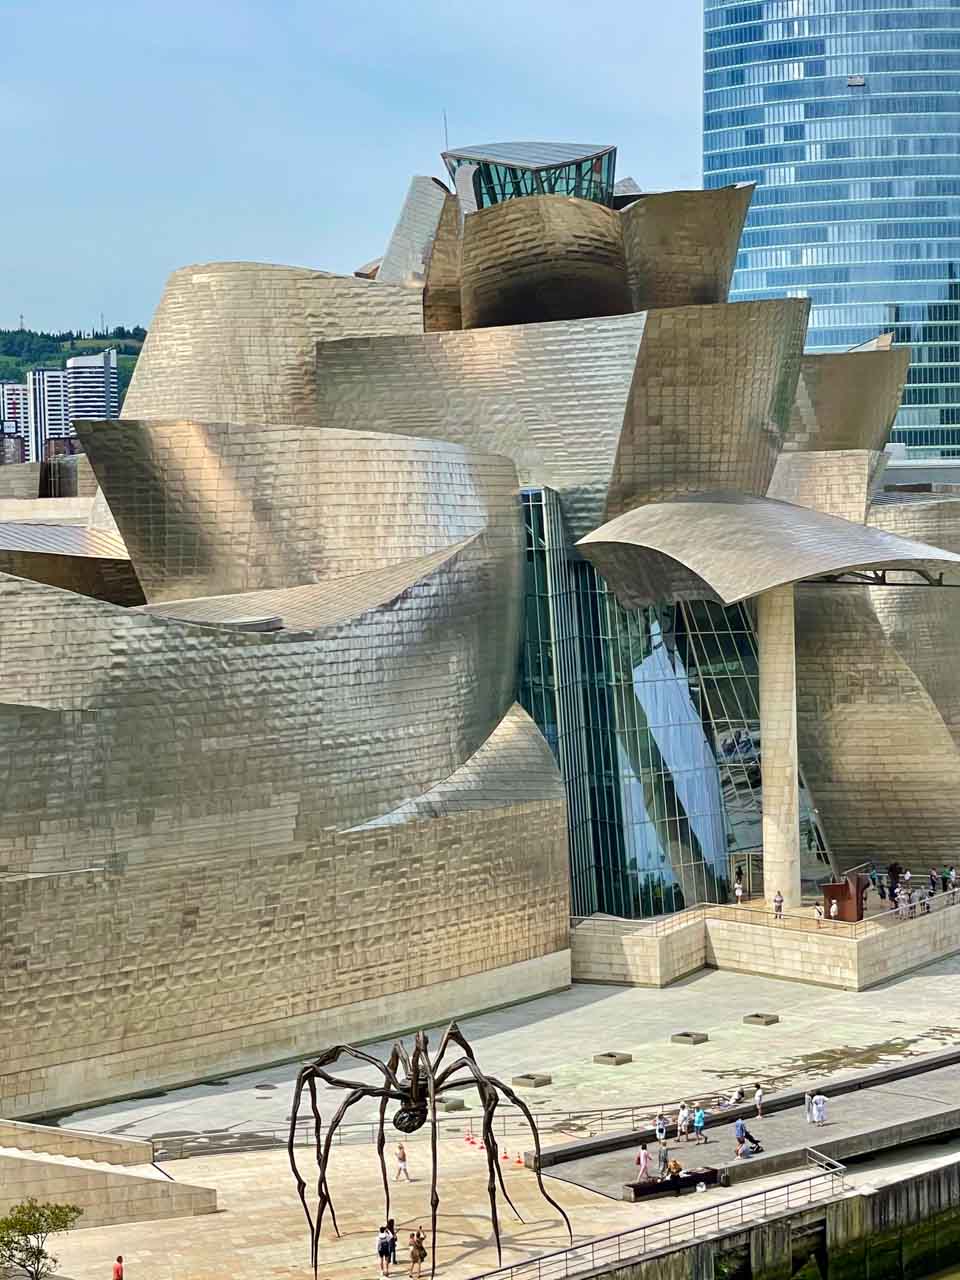 The Bilbao Guggenheim Museum forms a backdrop for a giant metal spider sculpture.